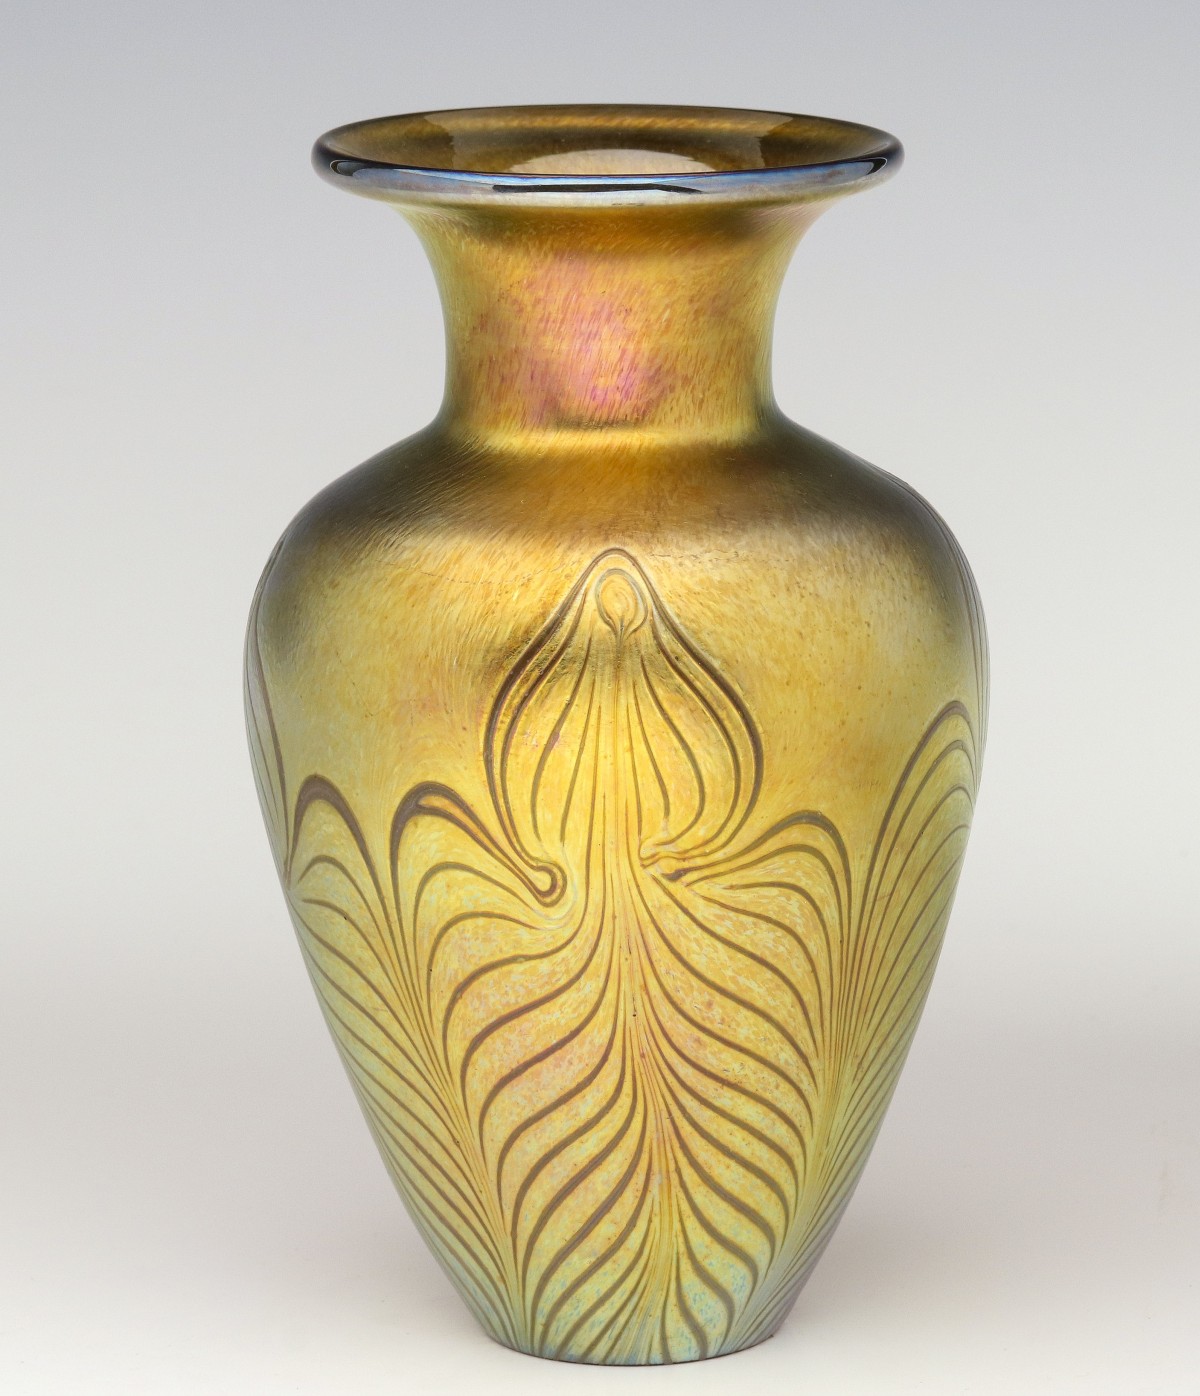 A ROBERT HELD ART GLASS VASE WITH PULLED FEATHER DECOR